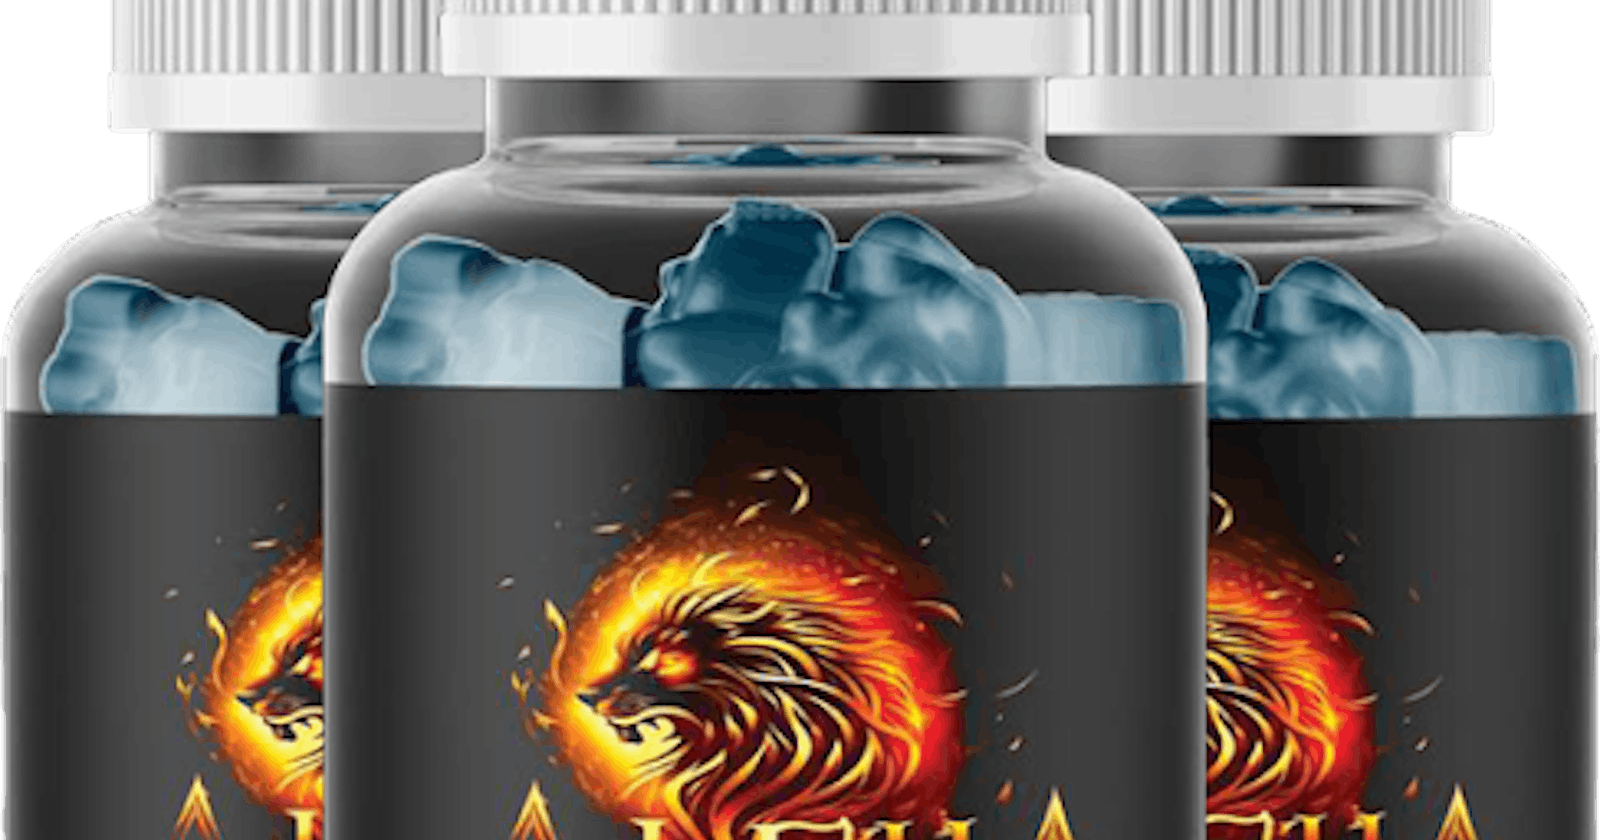 Alpha Ignite Male Enhancement Gummies: Testosterone Booster That Works or a Waste of Money? 15 Days Results?